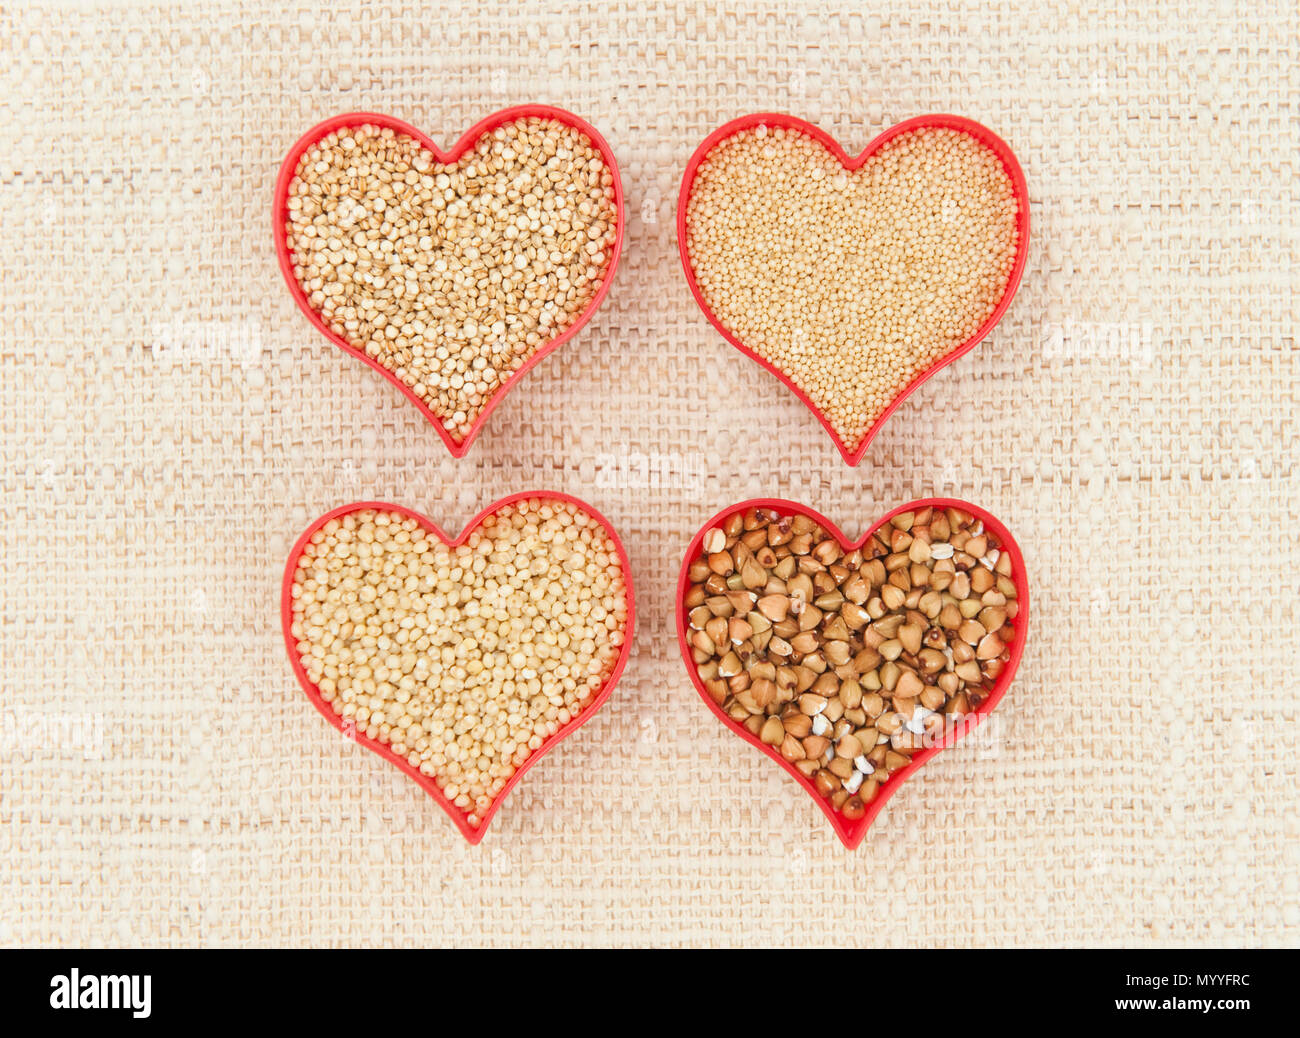 Four red hearts filled with health super seeds quinoa, millet, amaranth and buckwheat on canvass Stock Photo